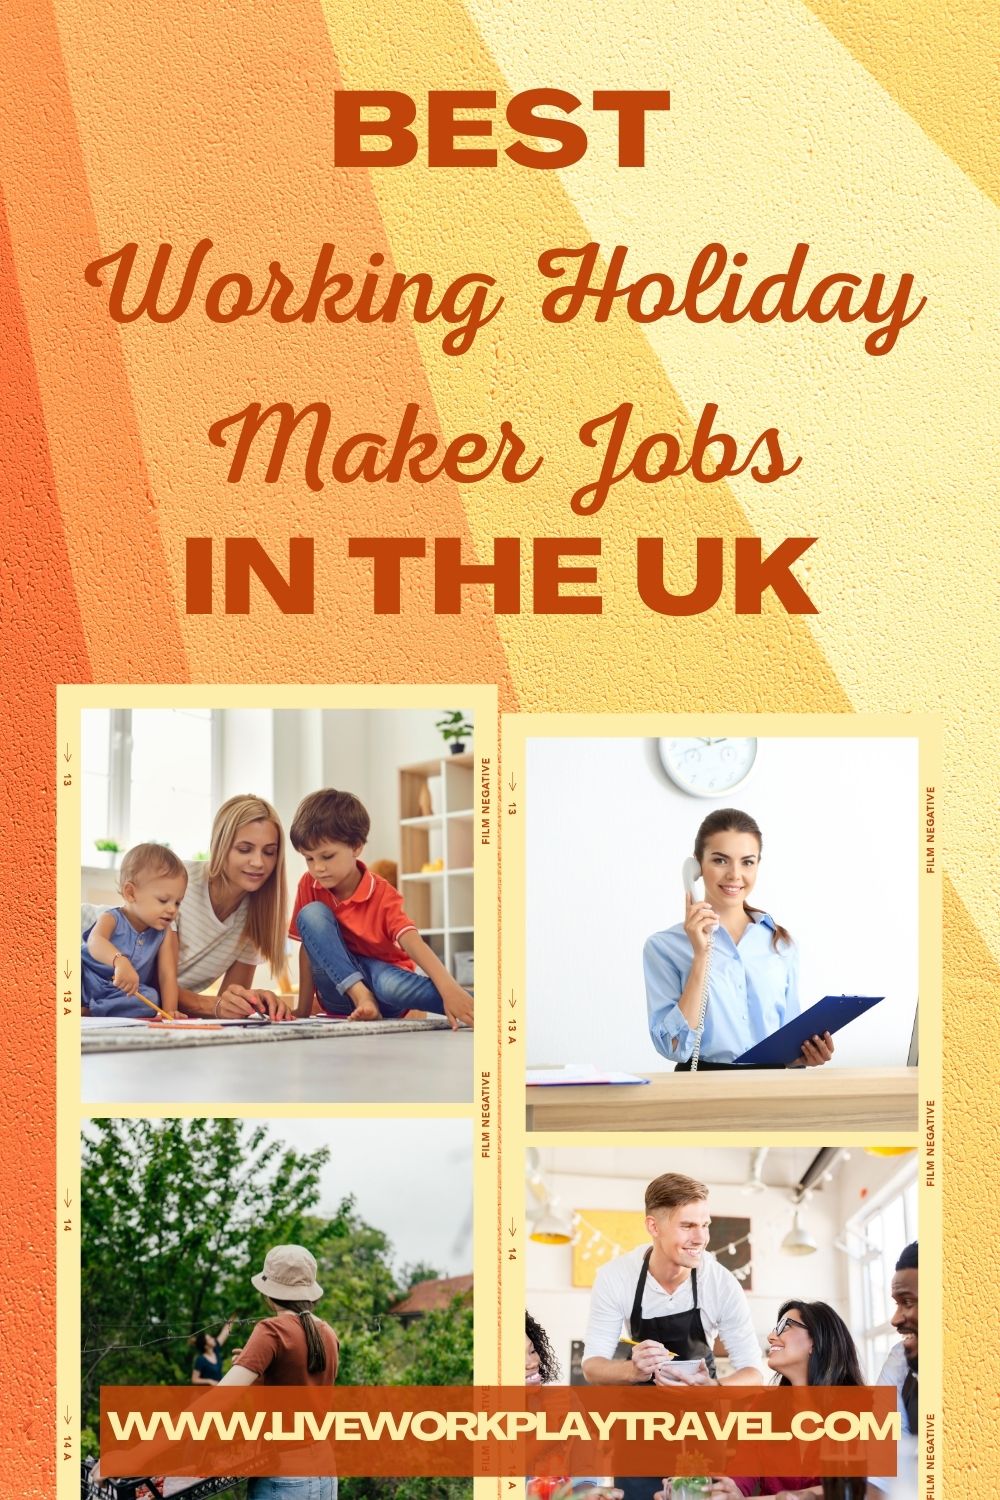 Best Working Holiday Jobs In the UK Can Include Being A Nanny, Receptionist, Fruit Picking Or Waiting Tables.